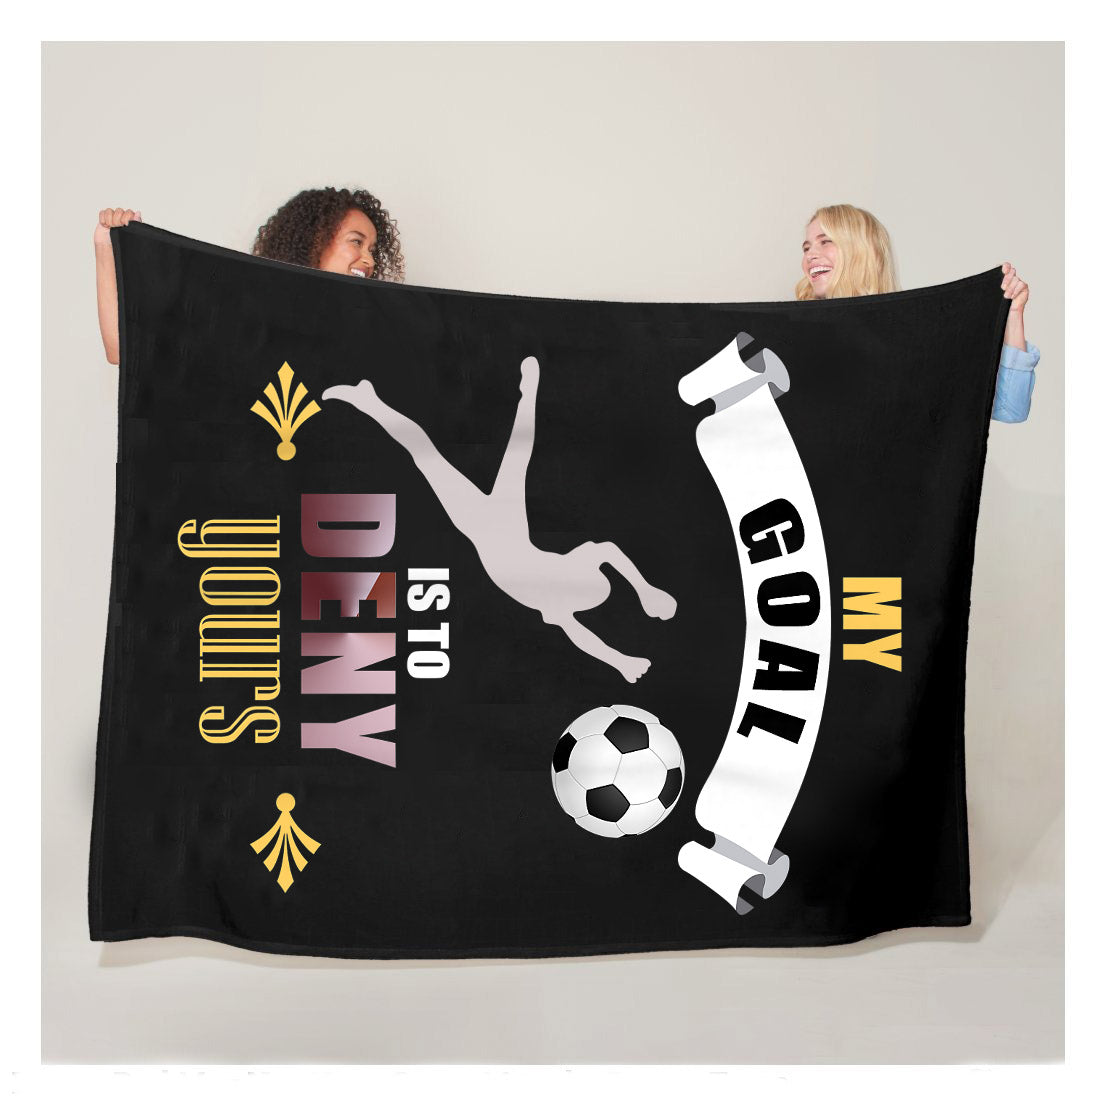 Funny My Goal Is To Deny Yours Soccer Goalie Defender Sherpa Blanket,  Soccer Outdoor Blankets, Soccer Gifts For Coach And Soccer Players, Birthday Gift For Soccer Player